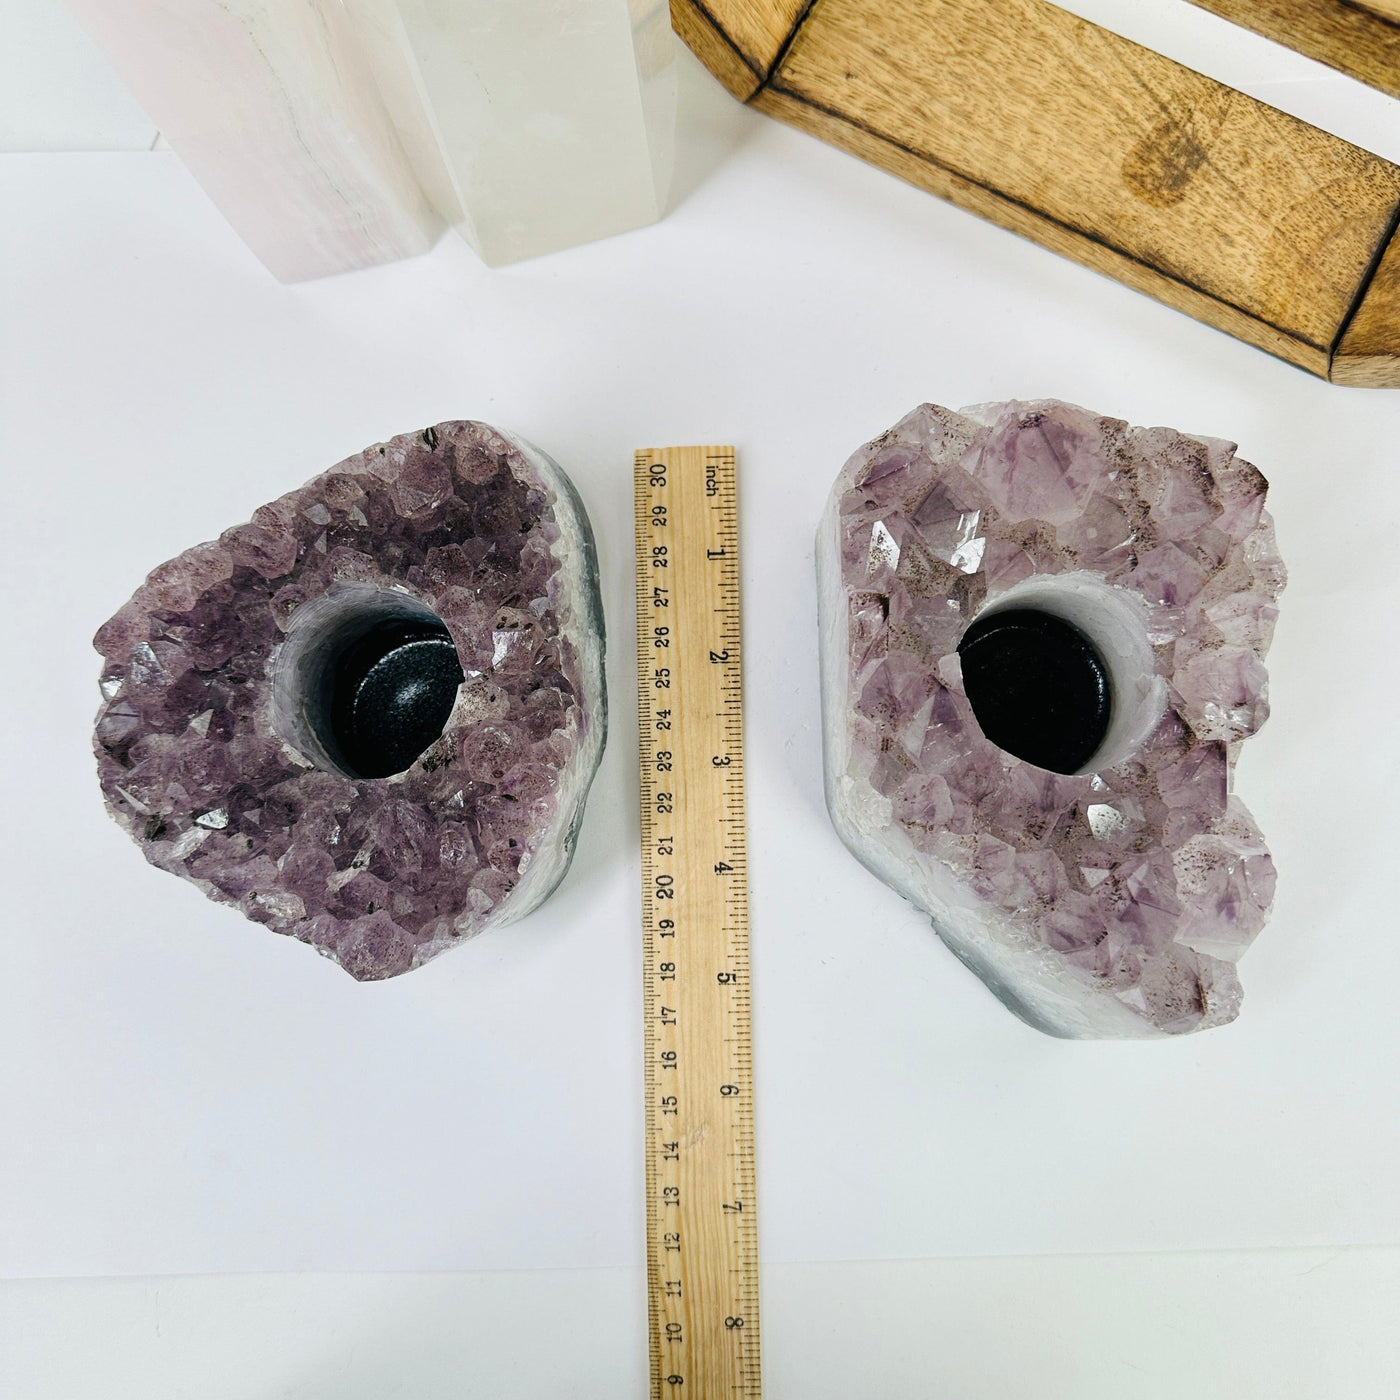 amethyst candle holders next to a ruler for size reference